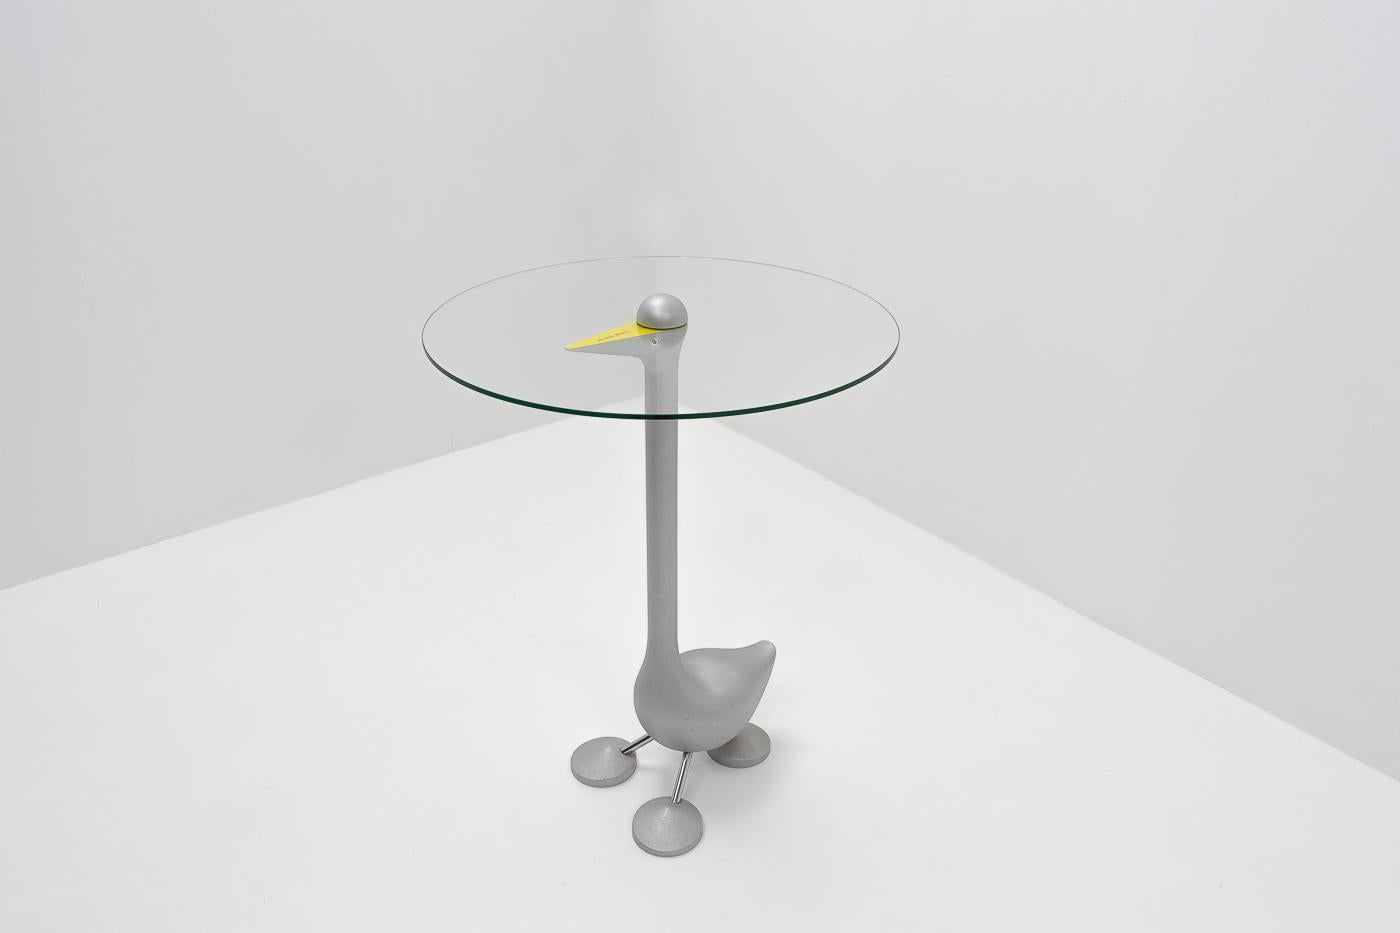 A goose shaped “Sirfo” side table designed by Alessandro Mendini for Zanotta during the 1980s. Tempered glass top on a solid aluminum base.

Mendini (1931 – 2019), was a well respected Italian designer and architect who was particularly known for